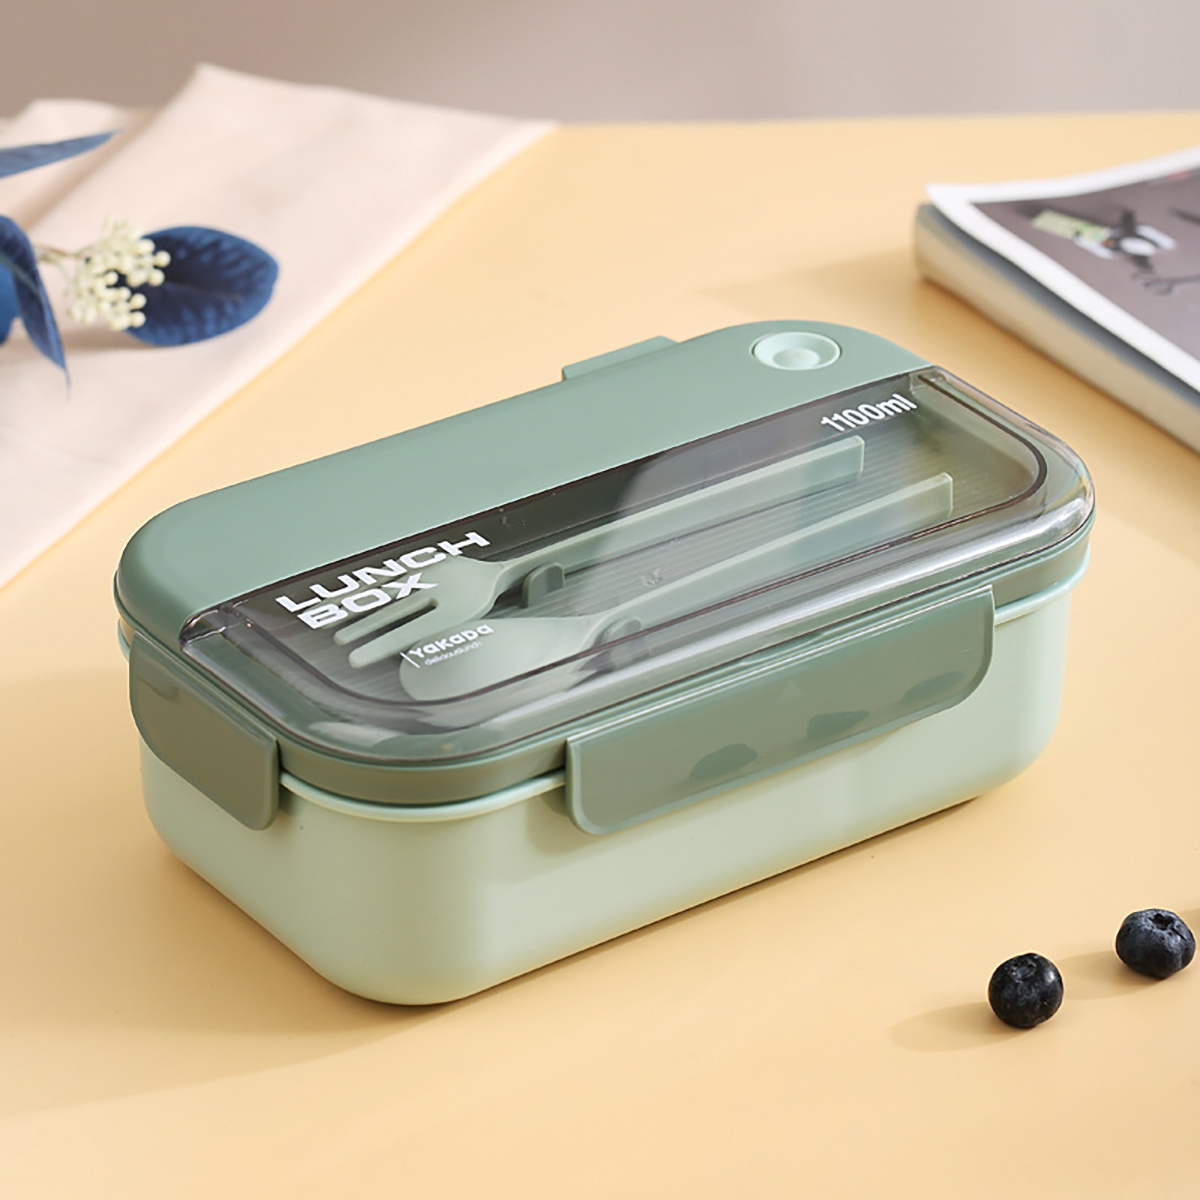 Leakproof Bento Box Lunch Container